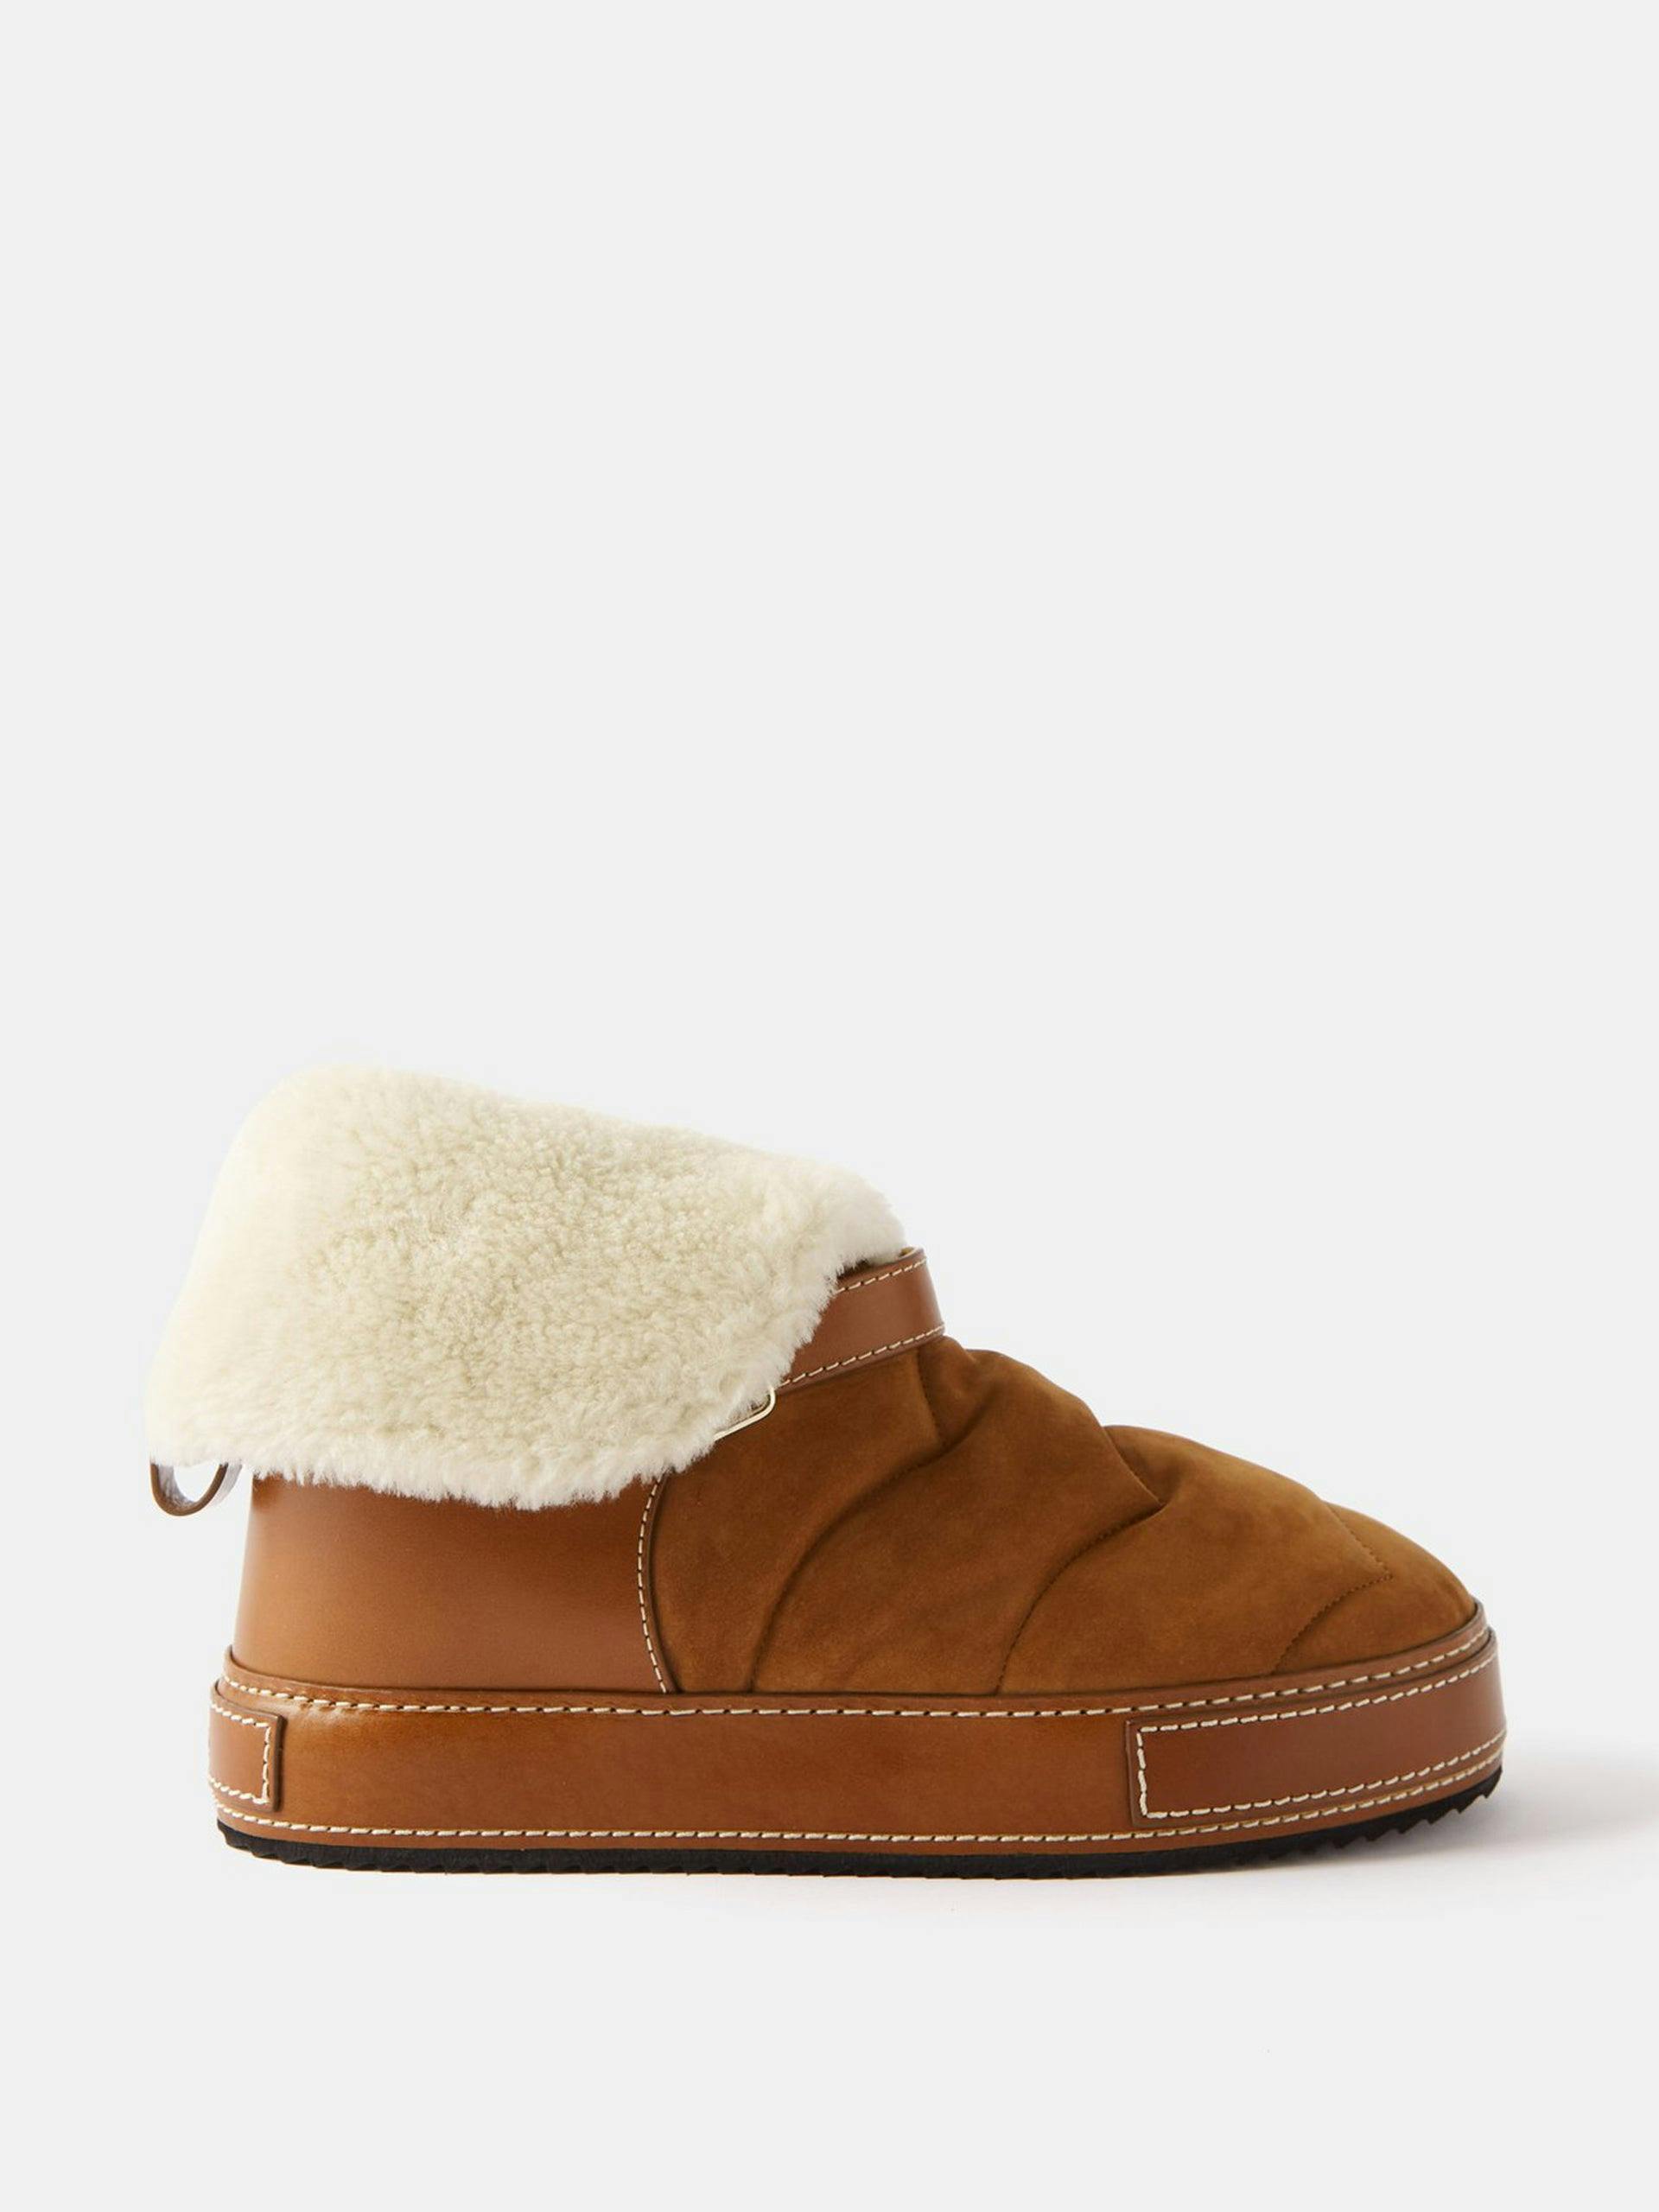 Tan shearling ankle boots